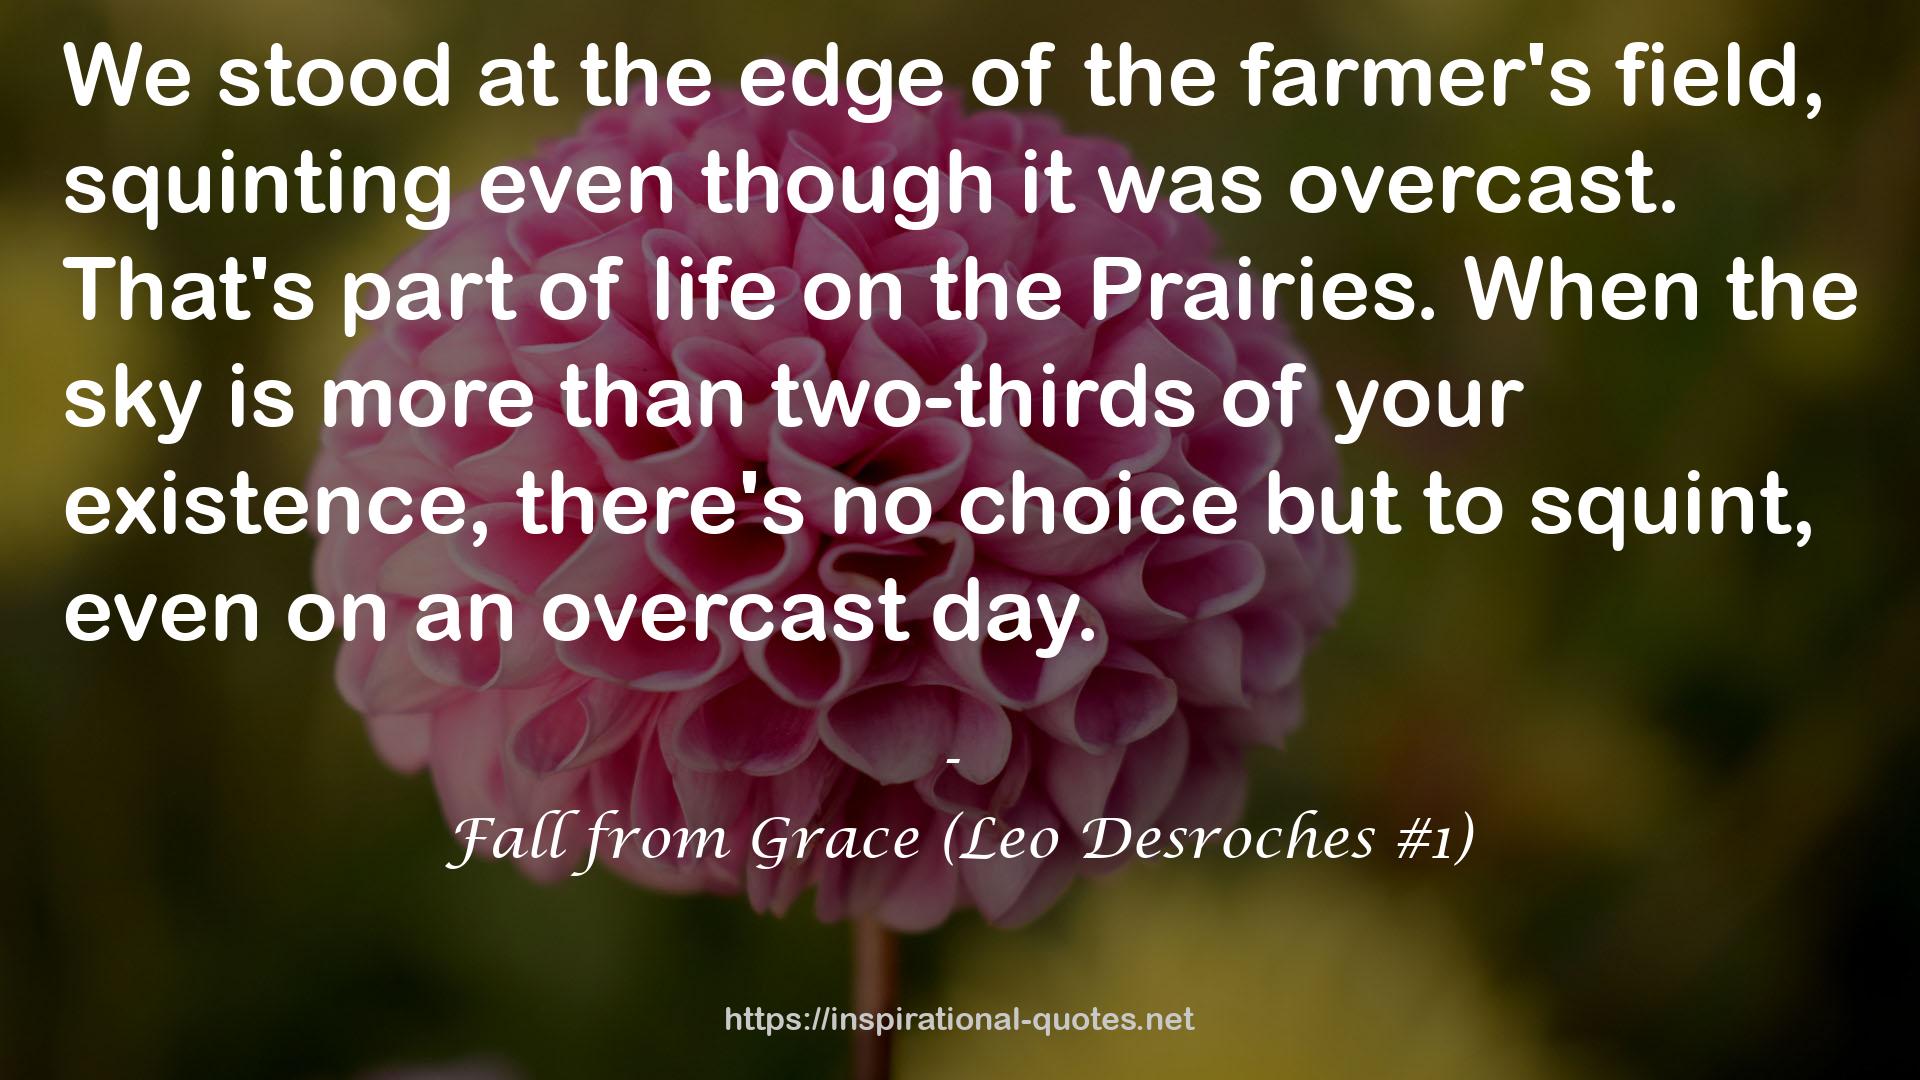 Fall from Grace (Leo Desroches #1) QUOTES